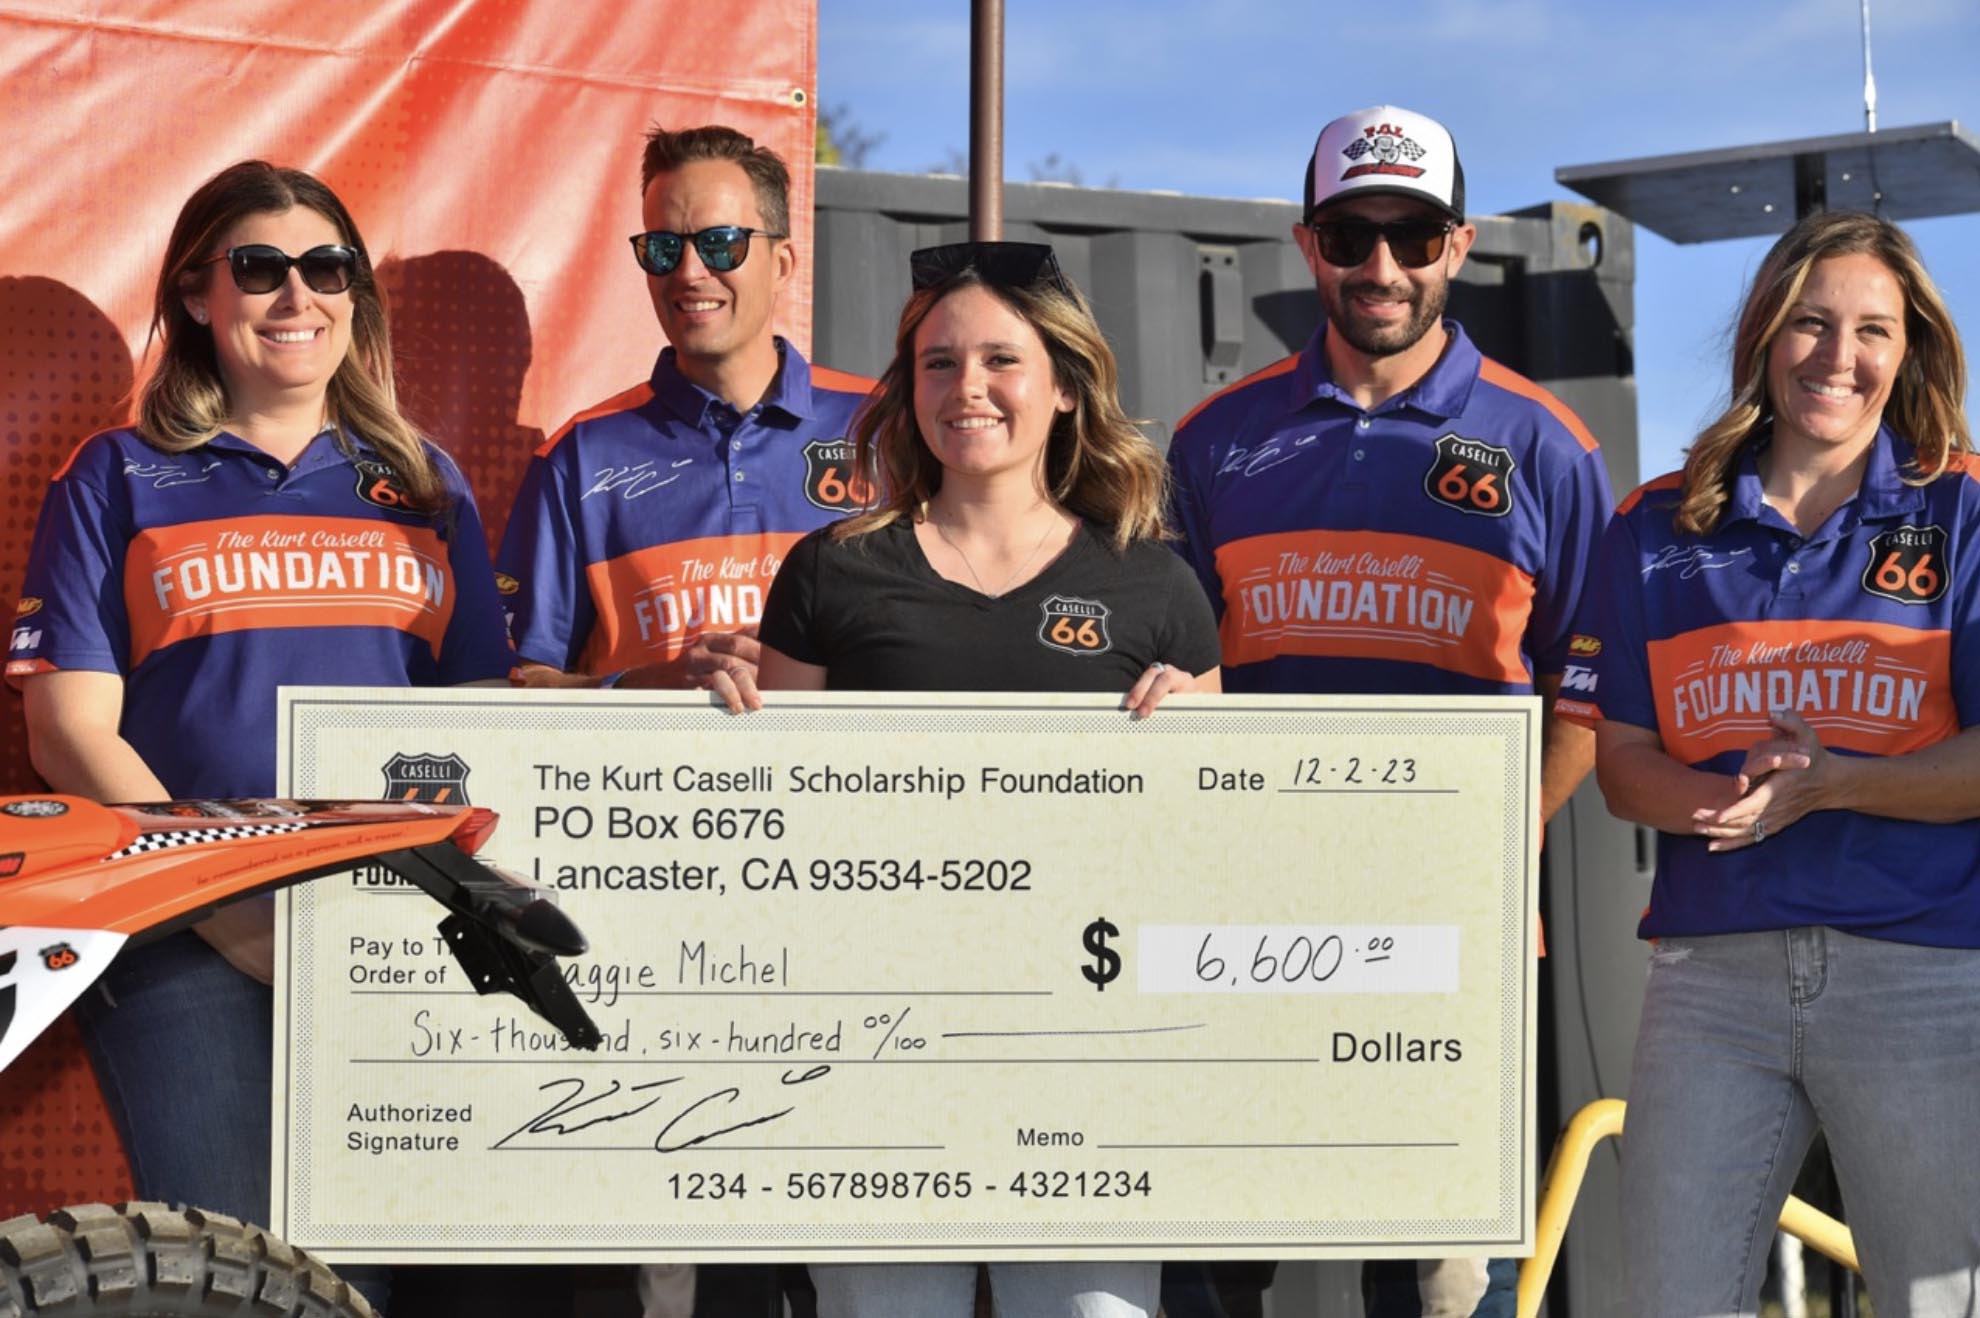 $6,600 Available with the Kurt Caselli Scholarship – Only 26 Days Remaining!